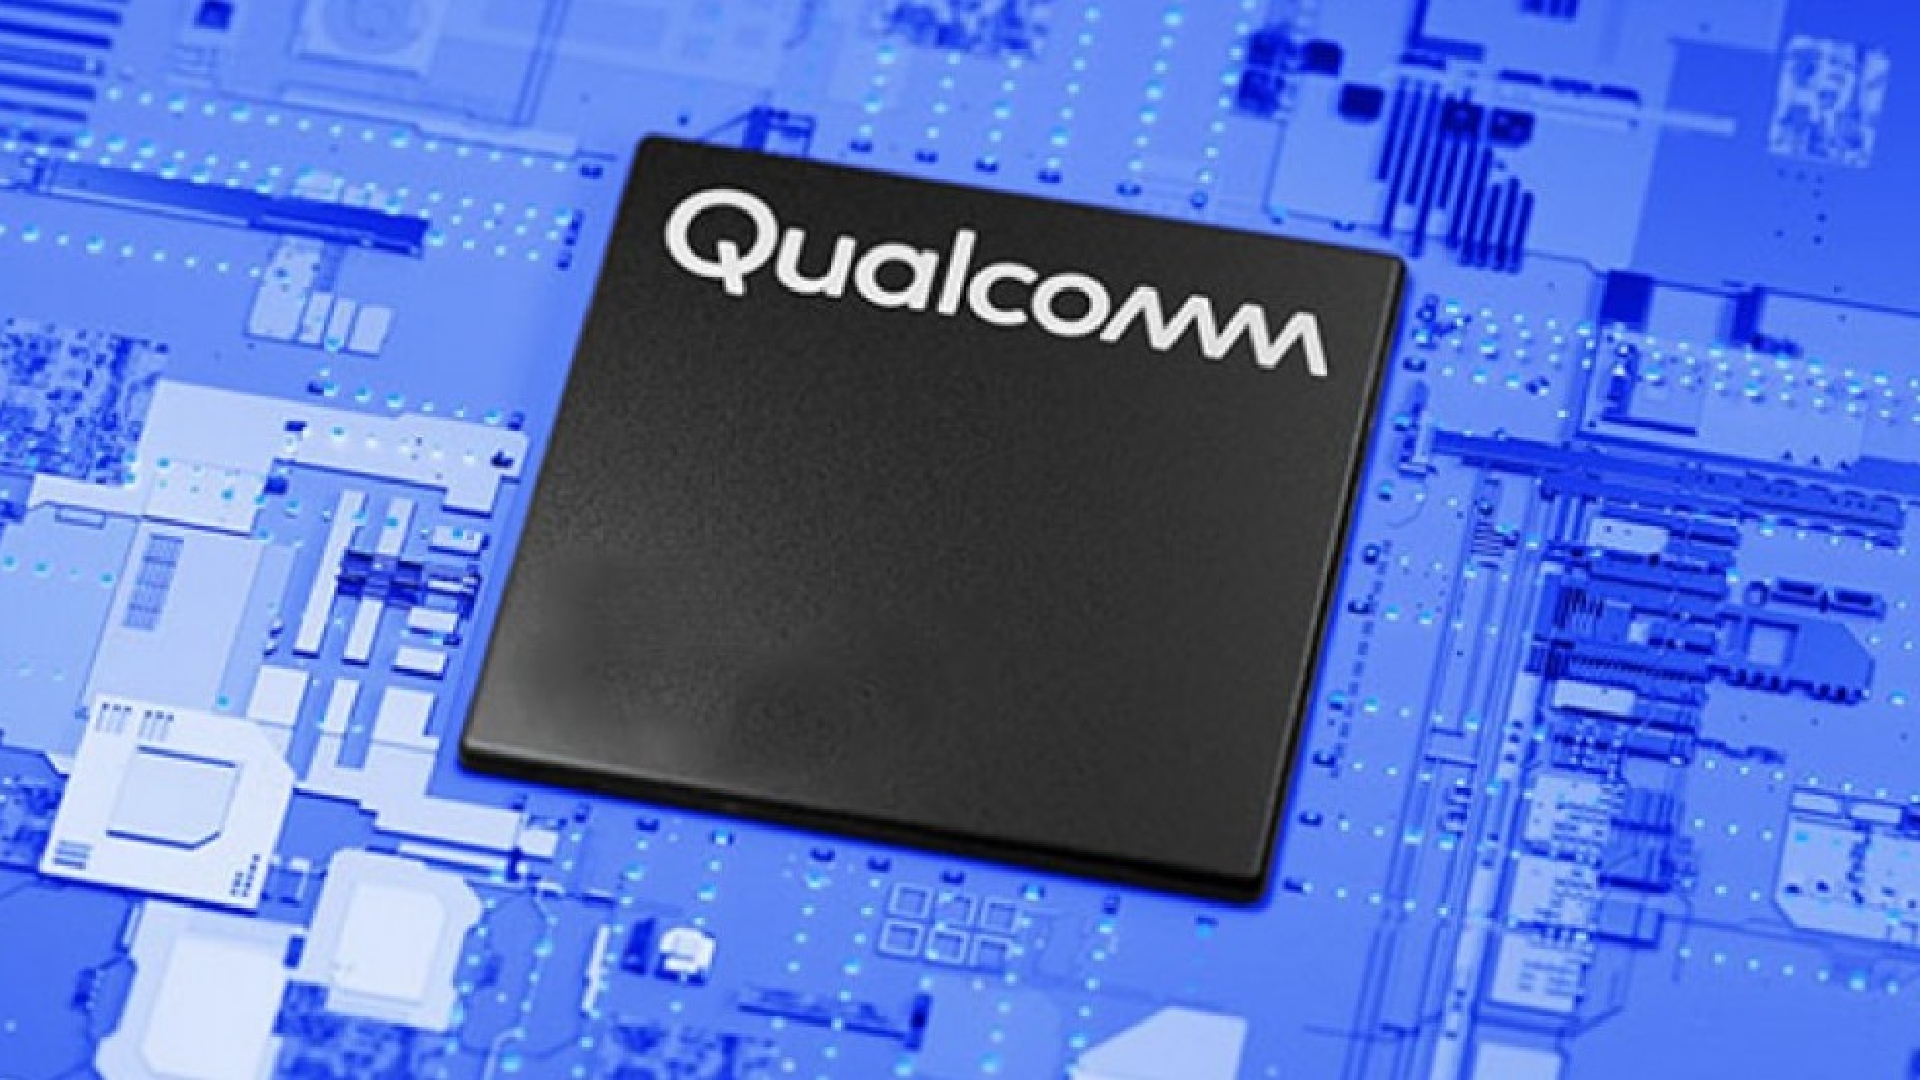 Qualcomm has introduced new branding for PC chipsets.